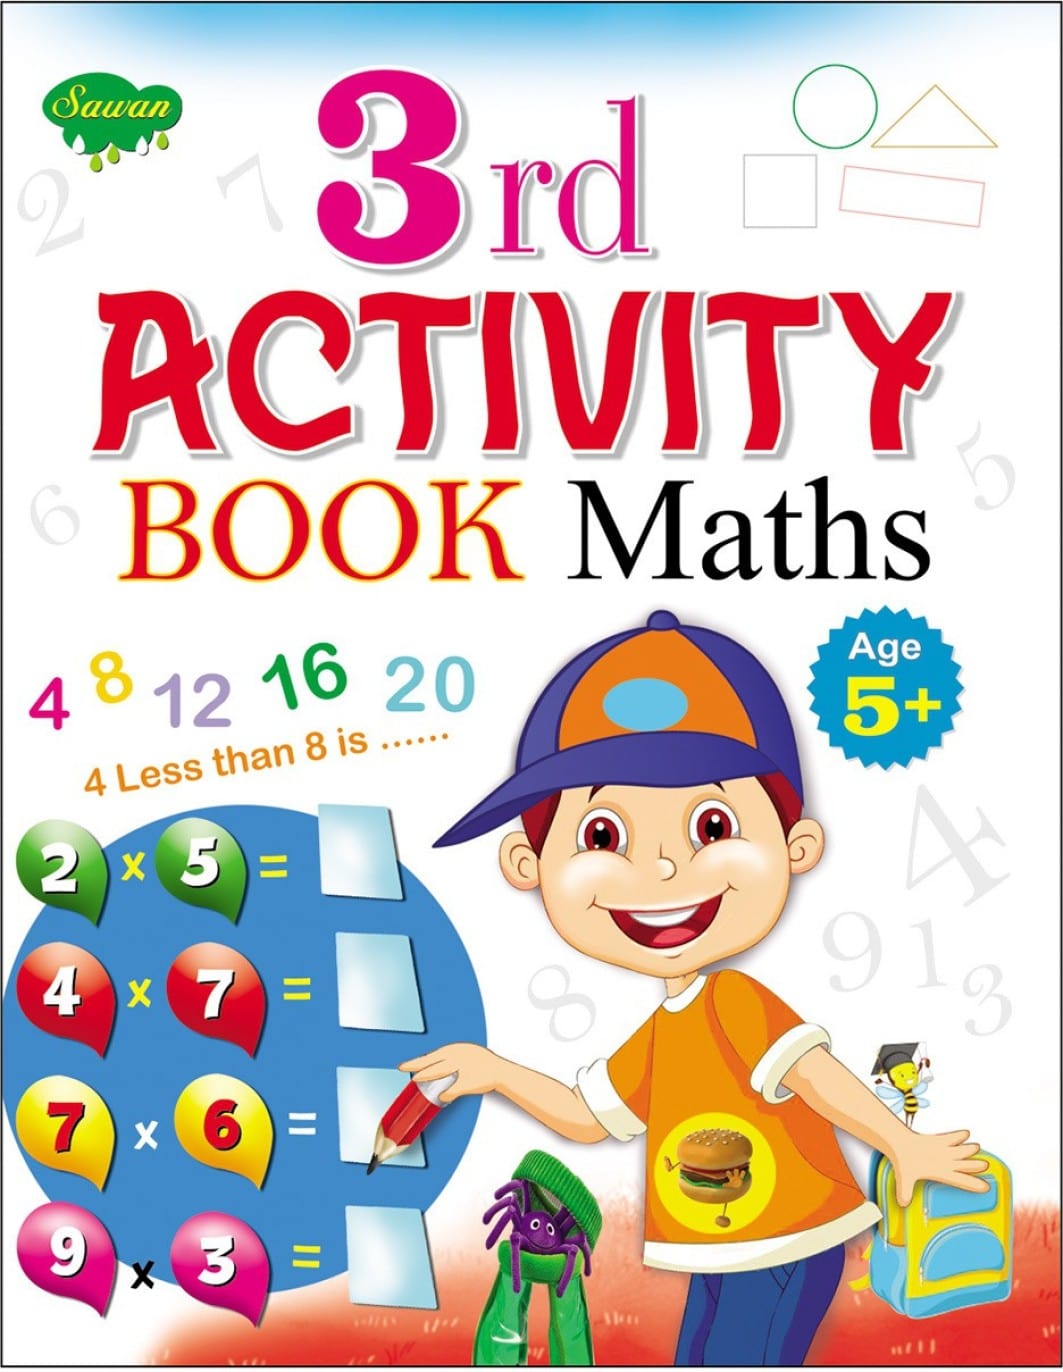 mahaveer book publication fort Educational books for kids (kid's 3rd activity book maths) EB-50